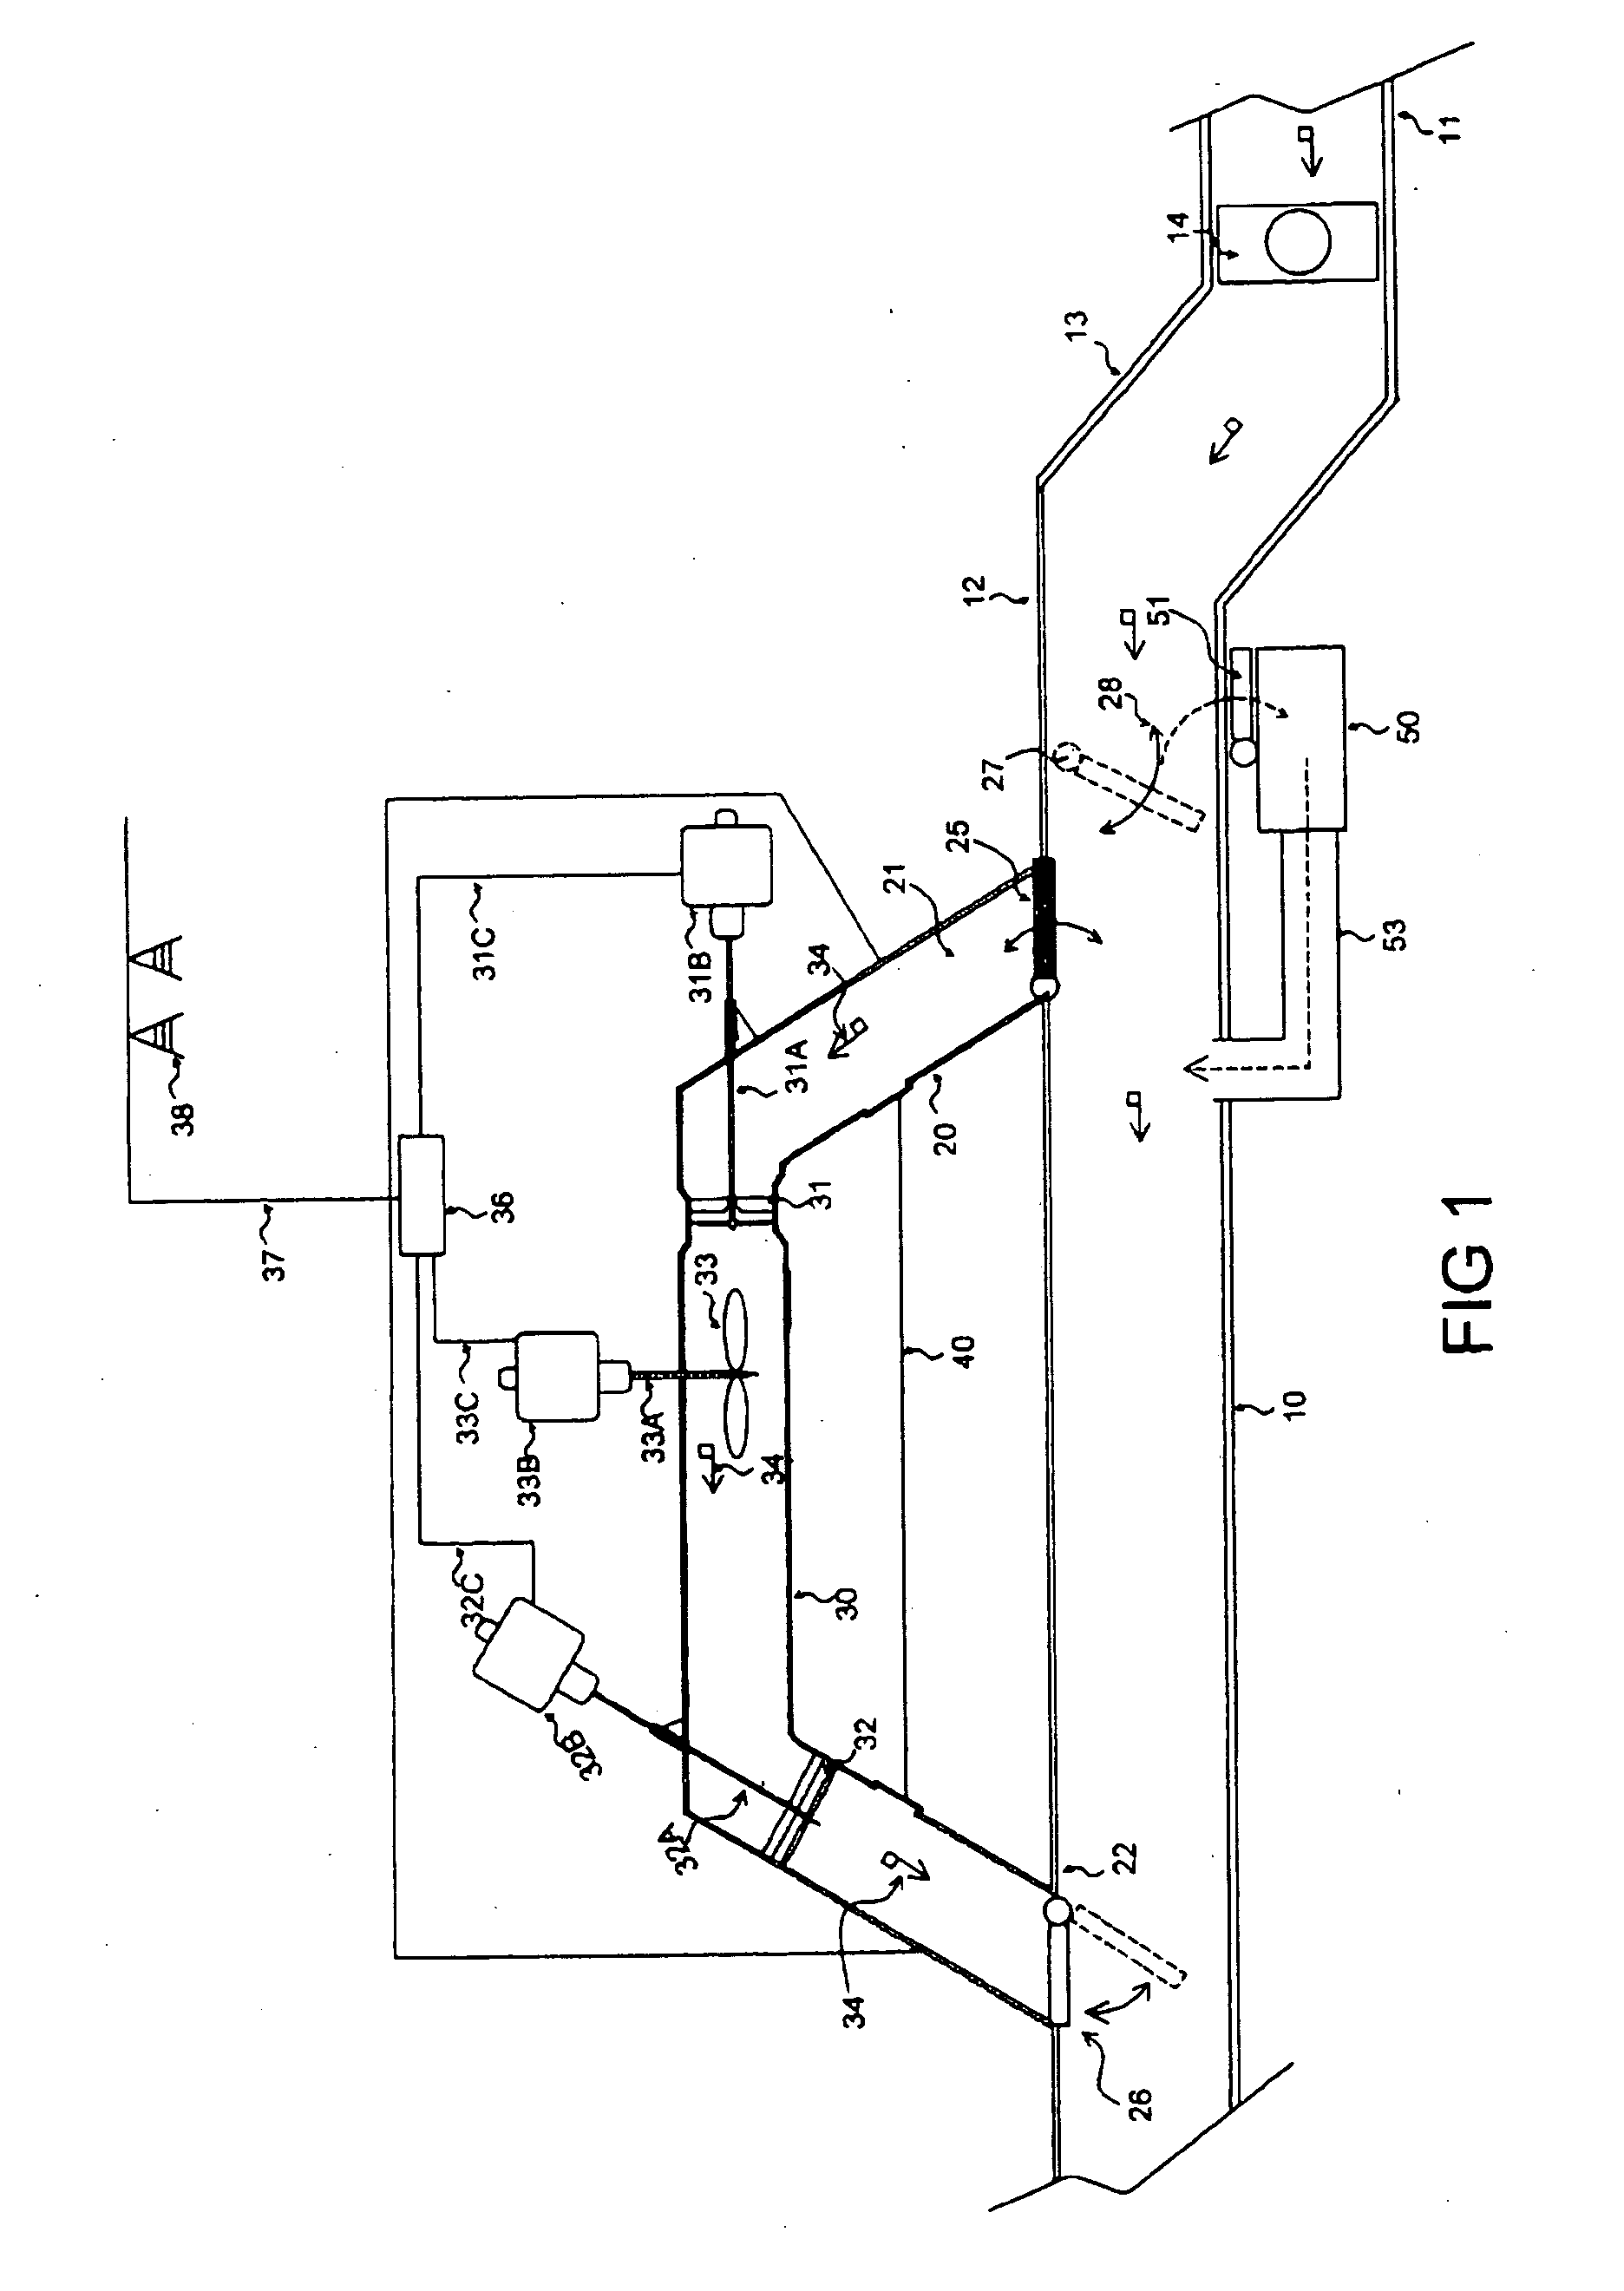 Waste water electrical power generating system